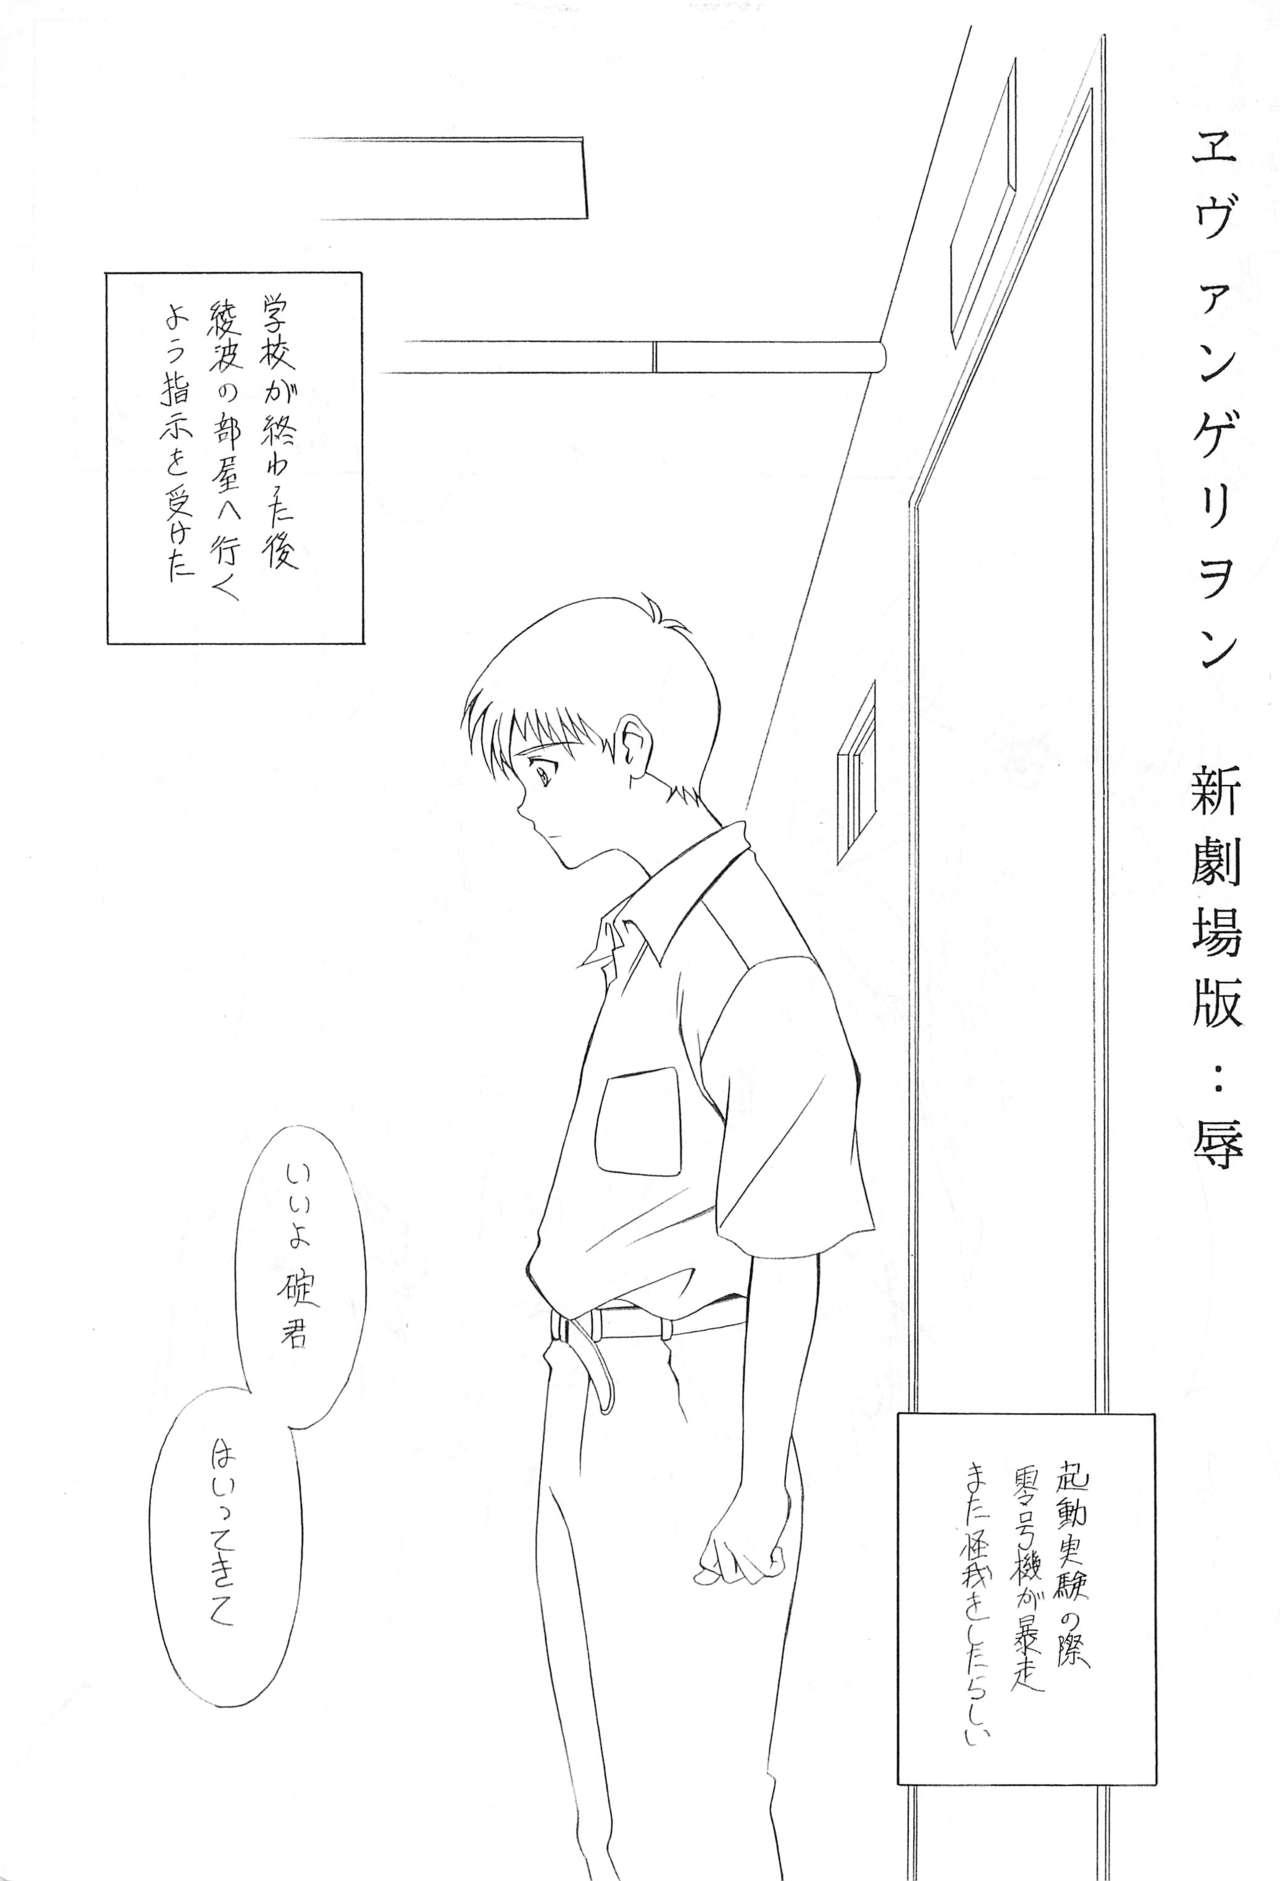 Street Fuck E can G vol.20 - Neon genesis evangelion Gay Straight - Page 3